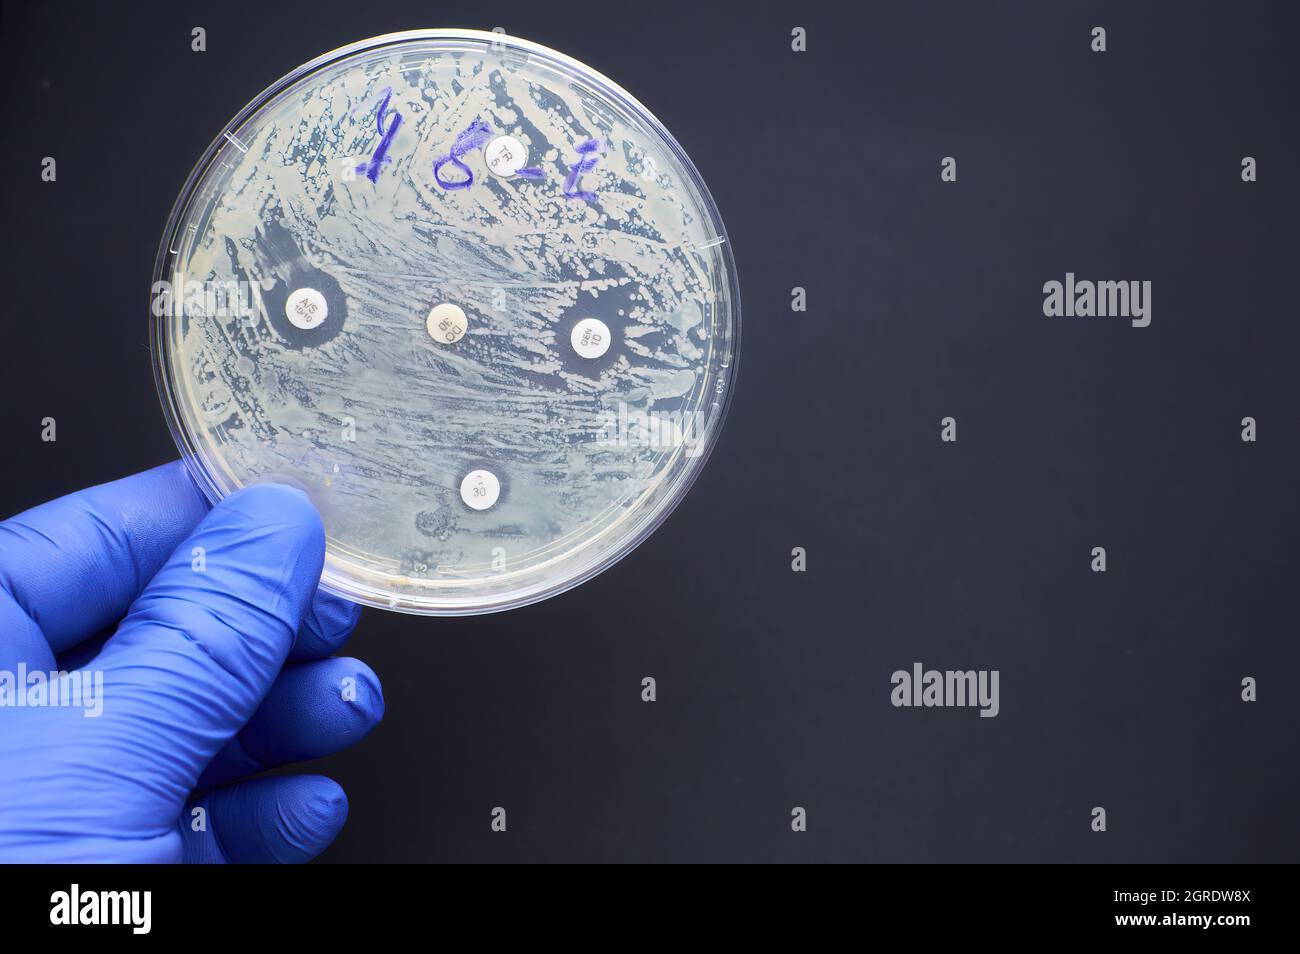 Antimicrobial Susceptibility By Diffusion Test. Multidrug Resistance Stock Photo